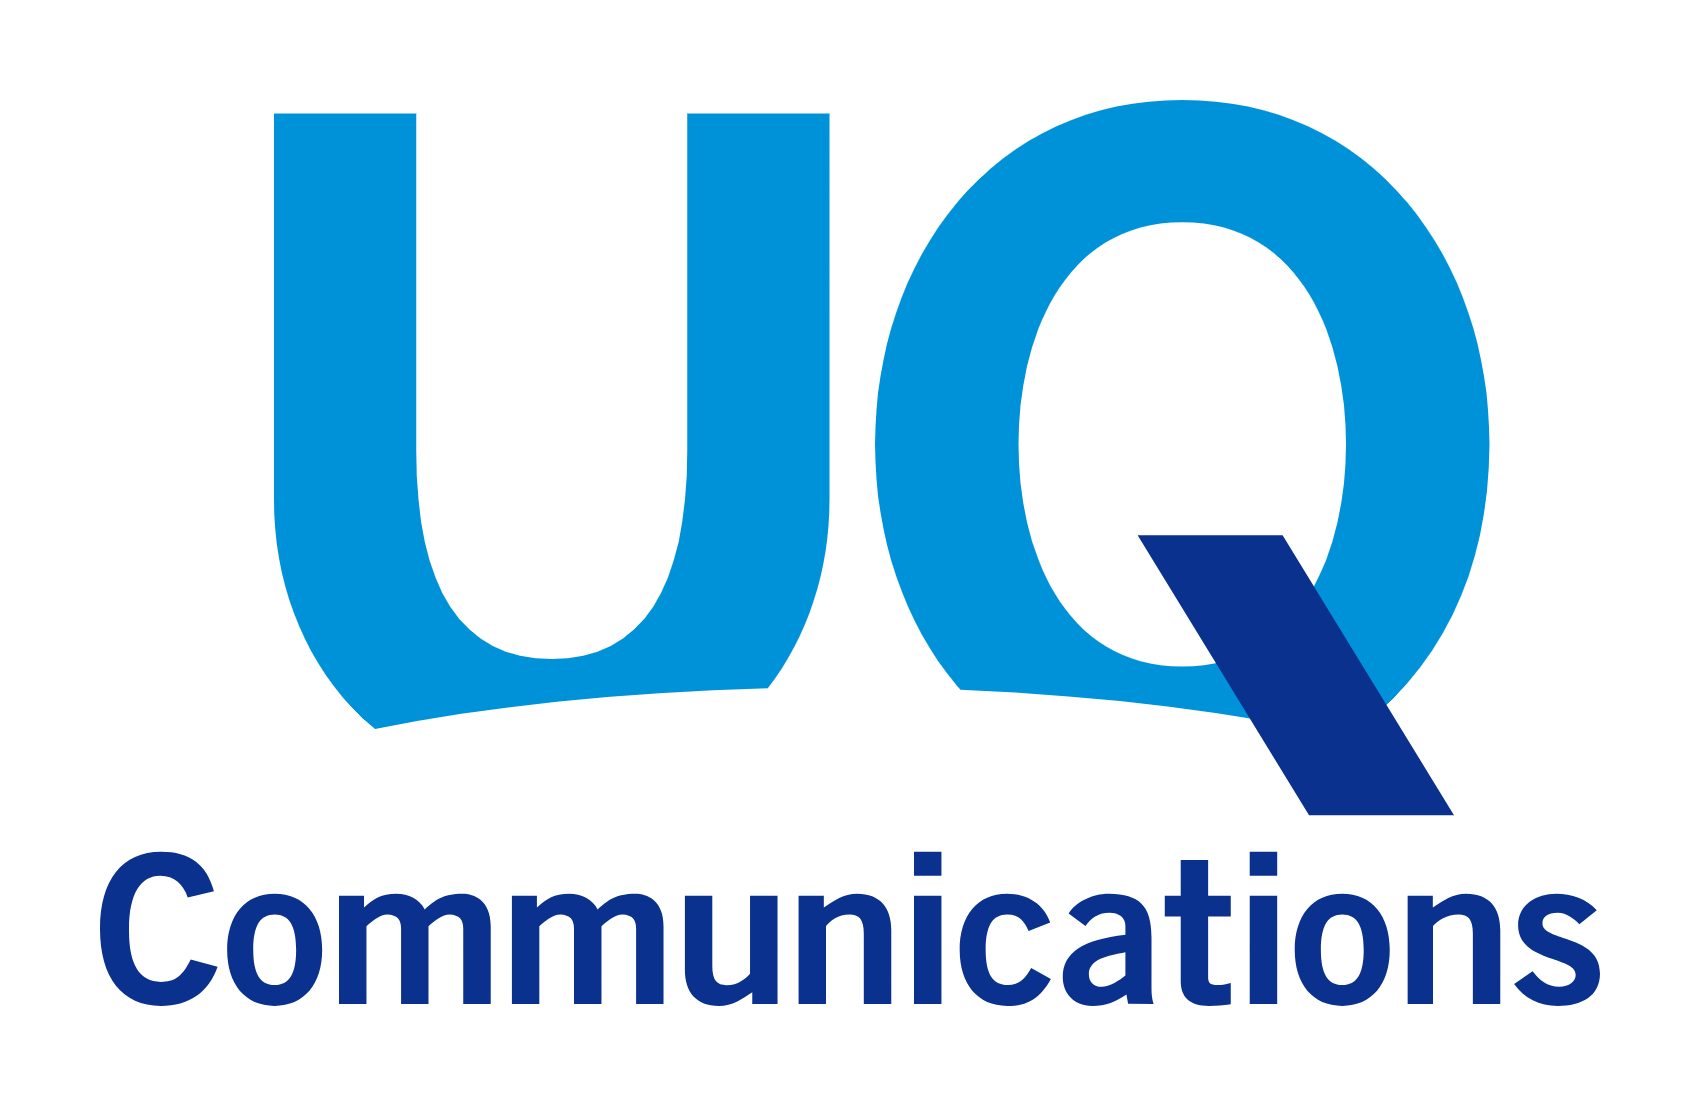 Download UQ Communications Logo PNG and Vector (PDF, SVG, Ai, EPS) Free